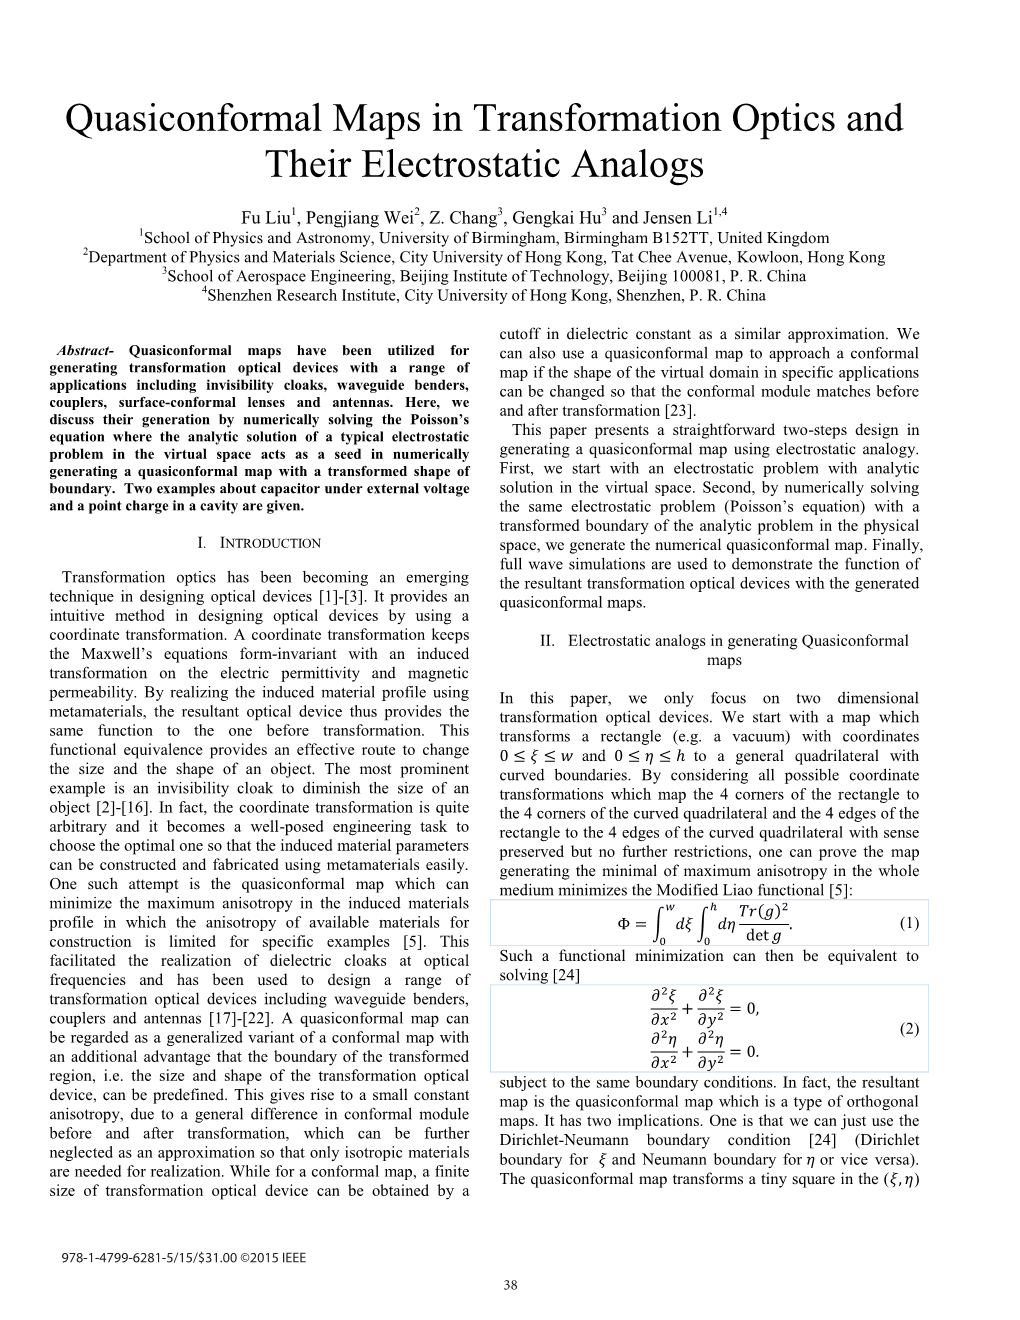 Quasiconformal Maps in Transformation Optics and Their Electrostatic Analogs